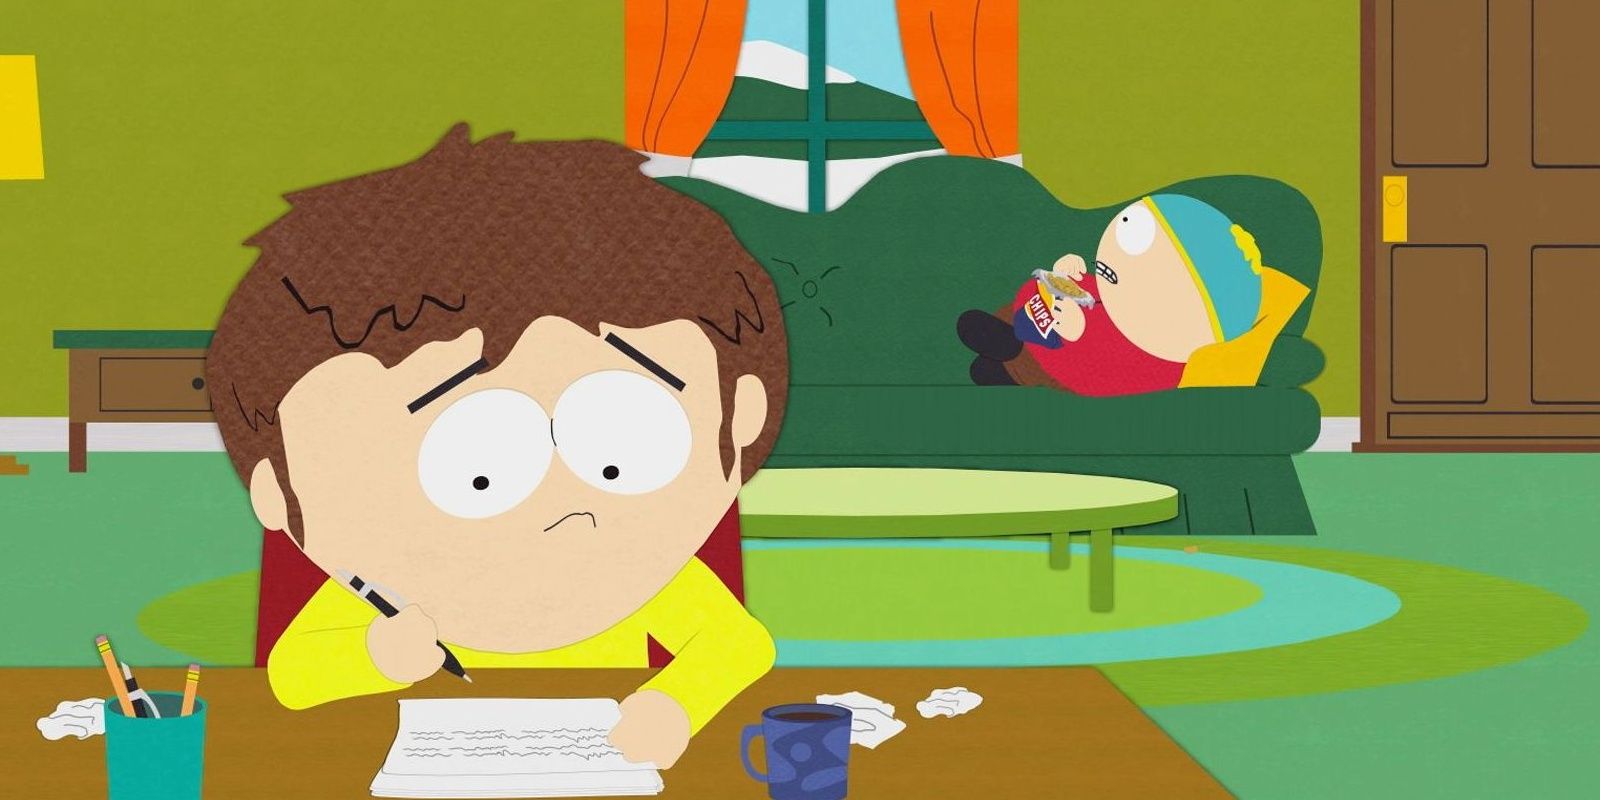 Jimmy making the fish sticks joke with Cartman on South Park.